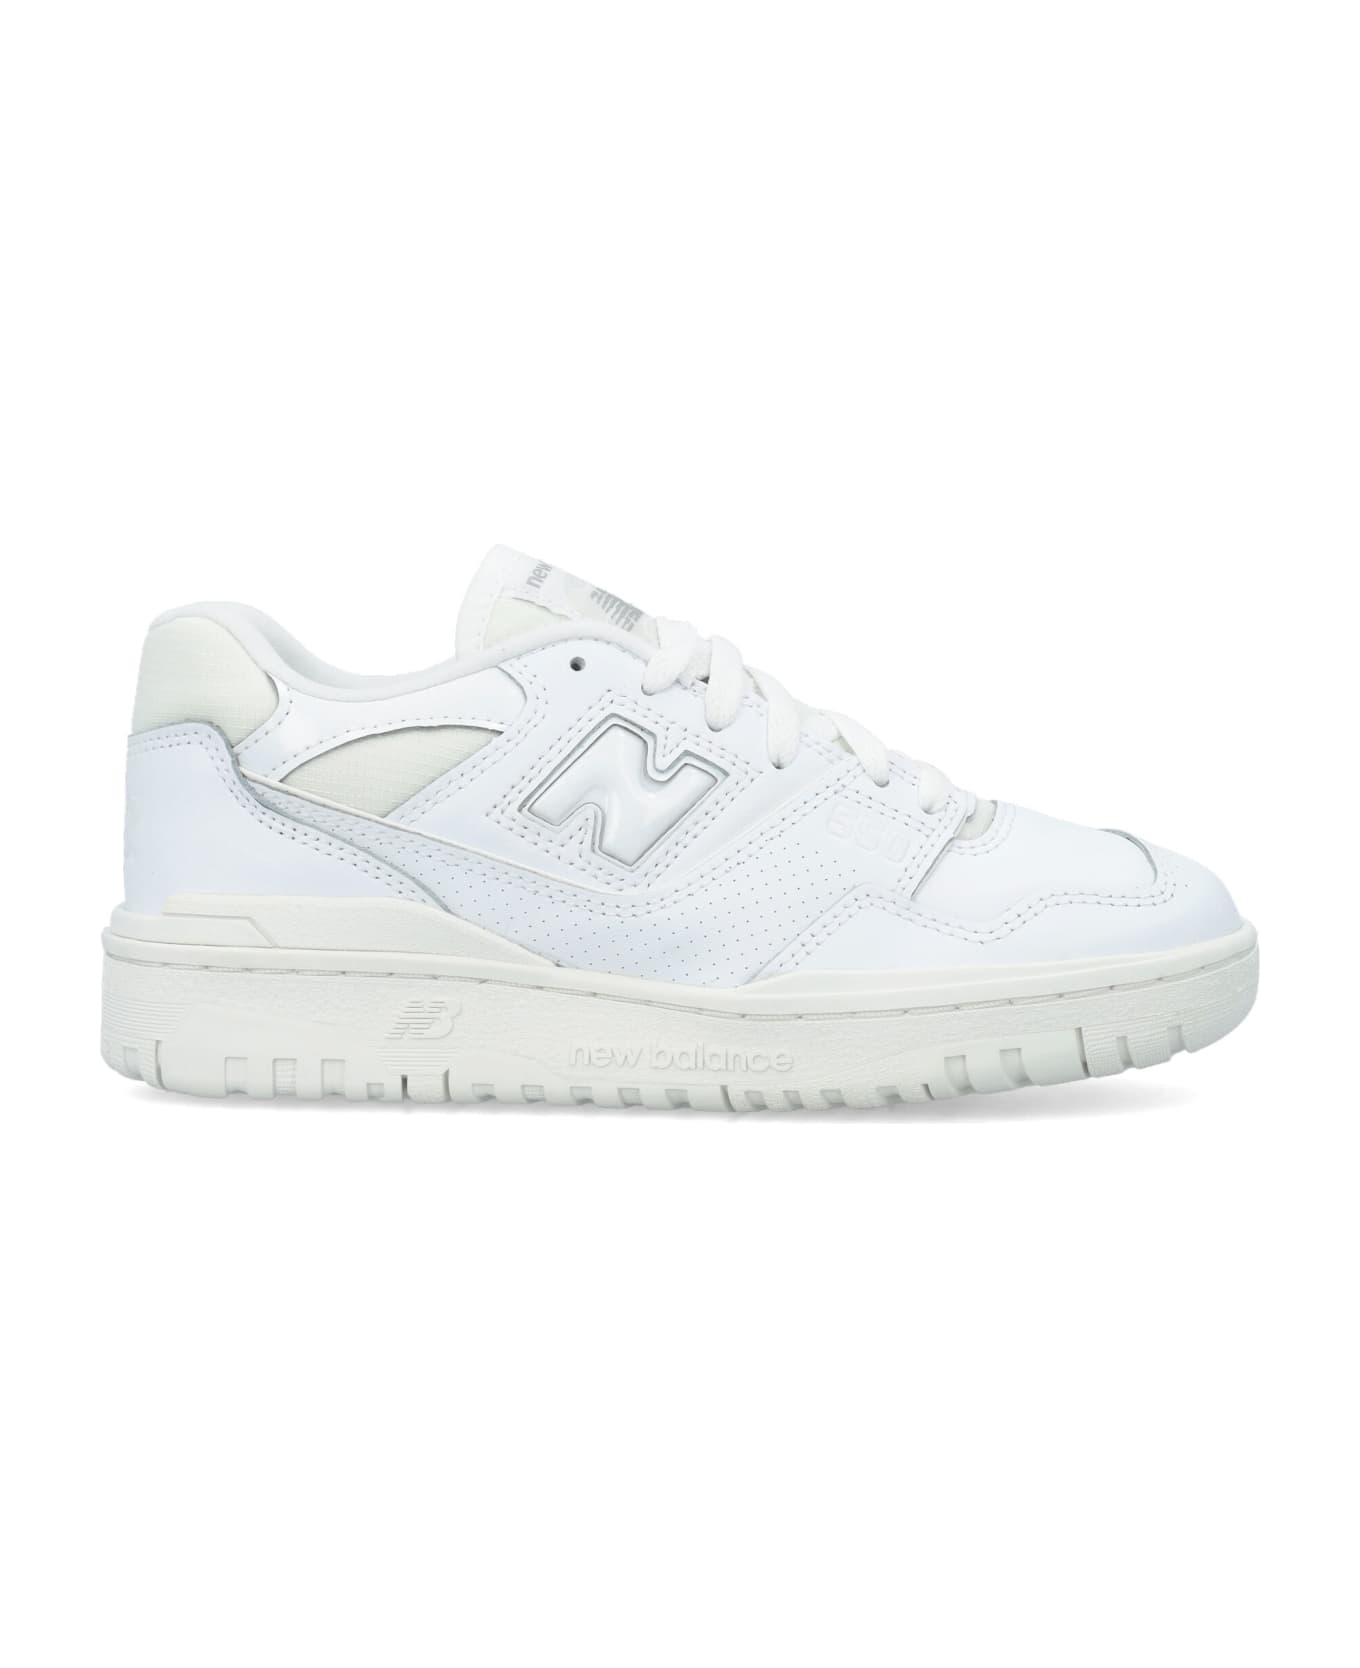 New Balance 550 Woman's Sneakers - WHITE PATENT スニーカー